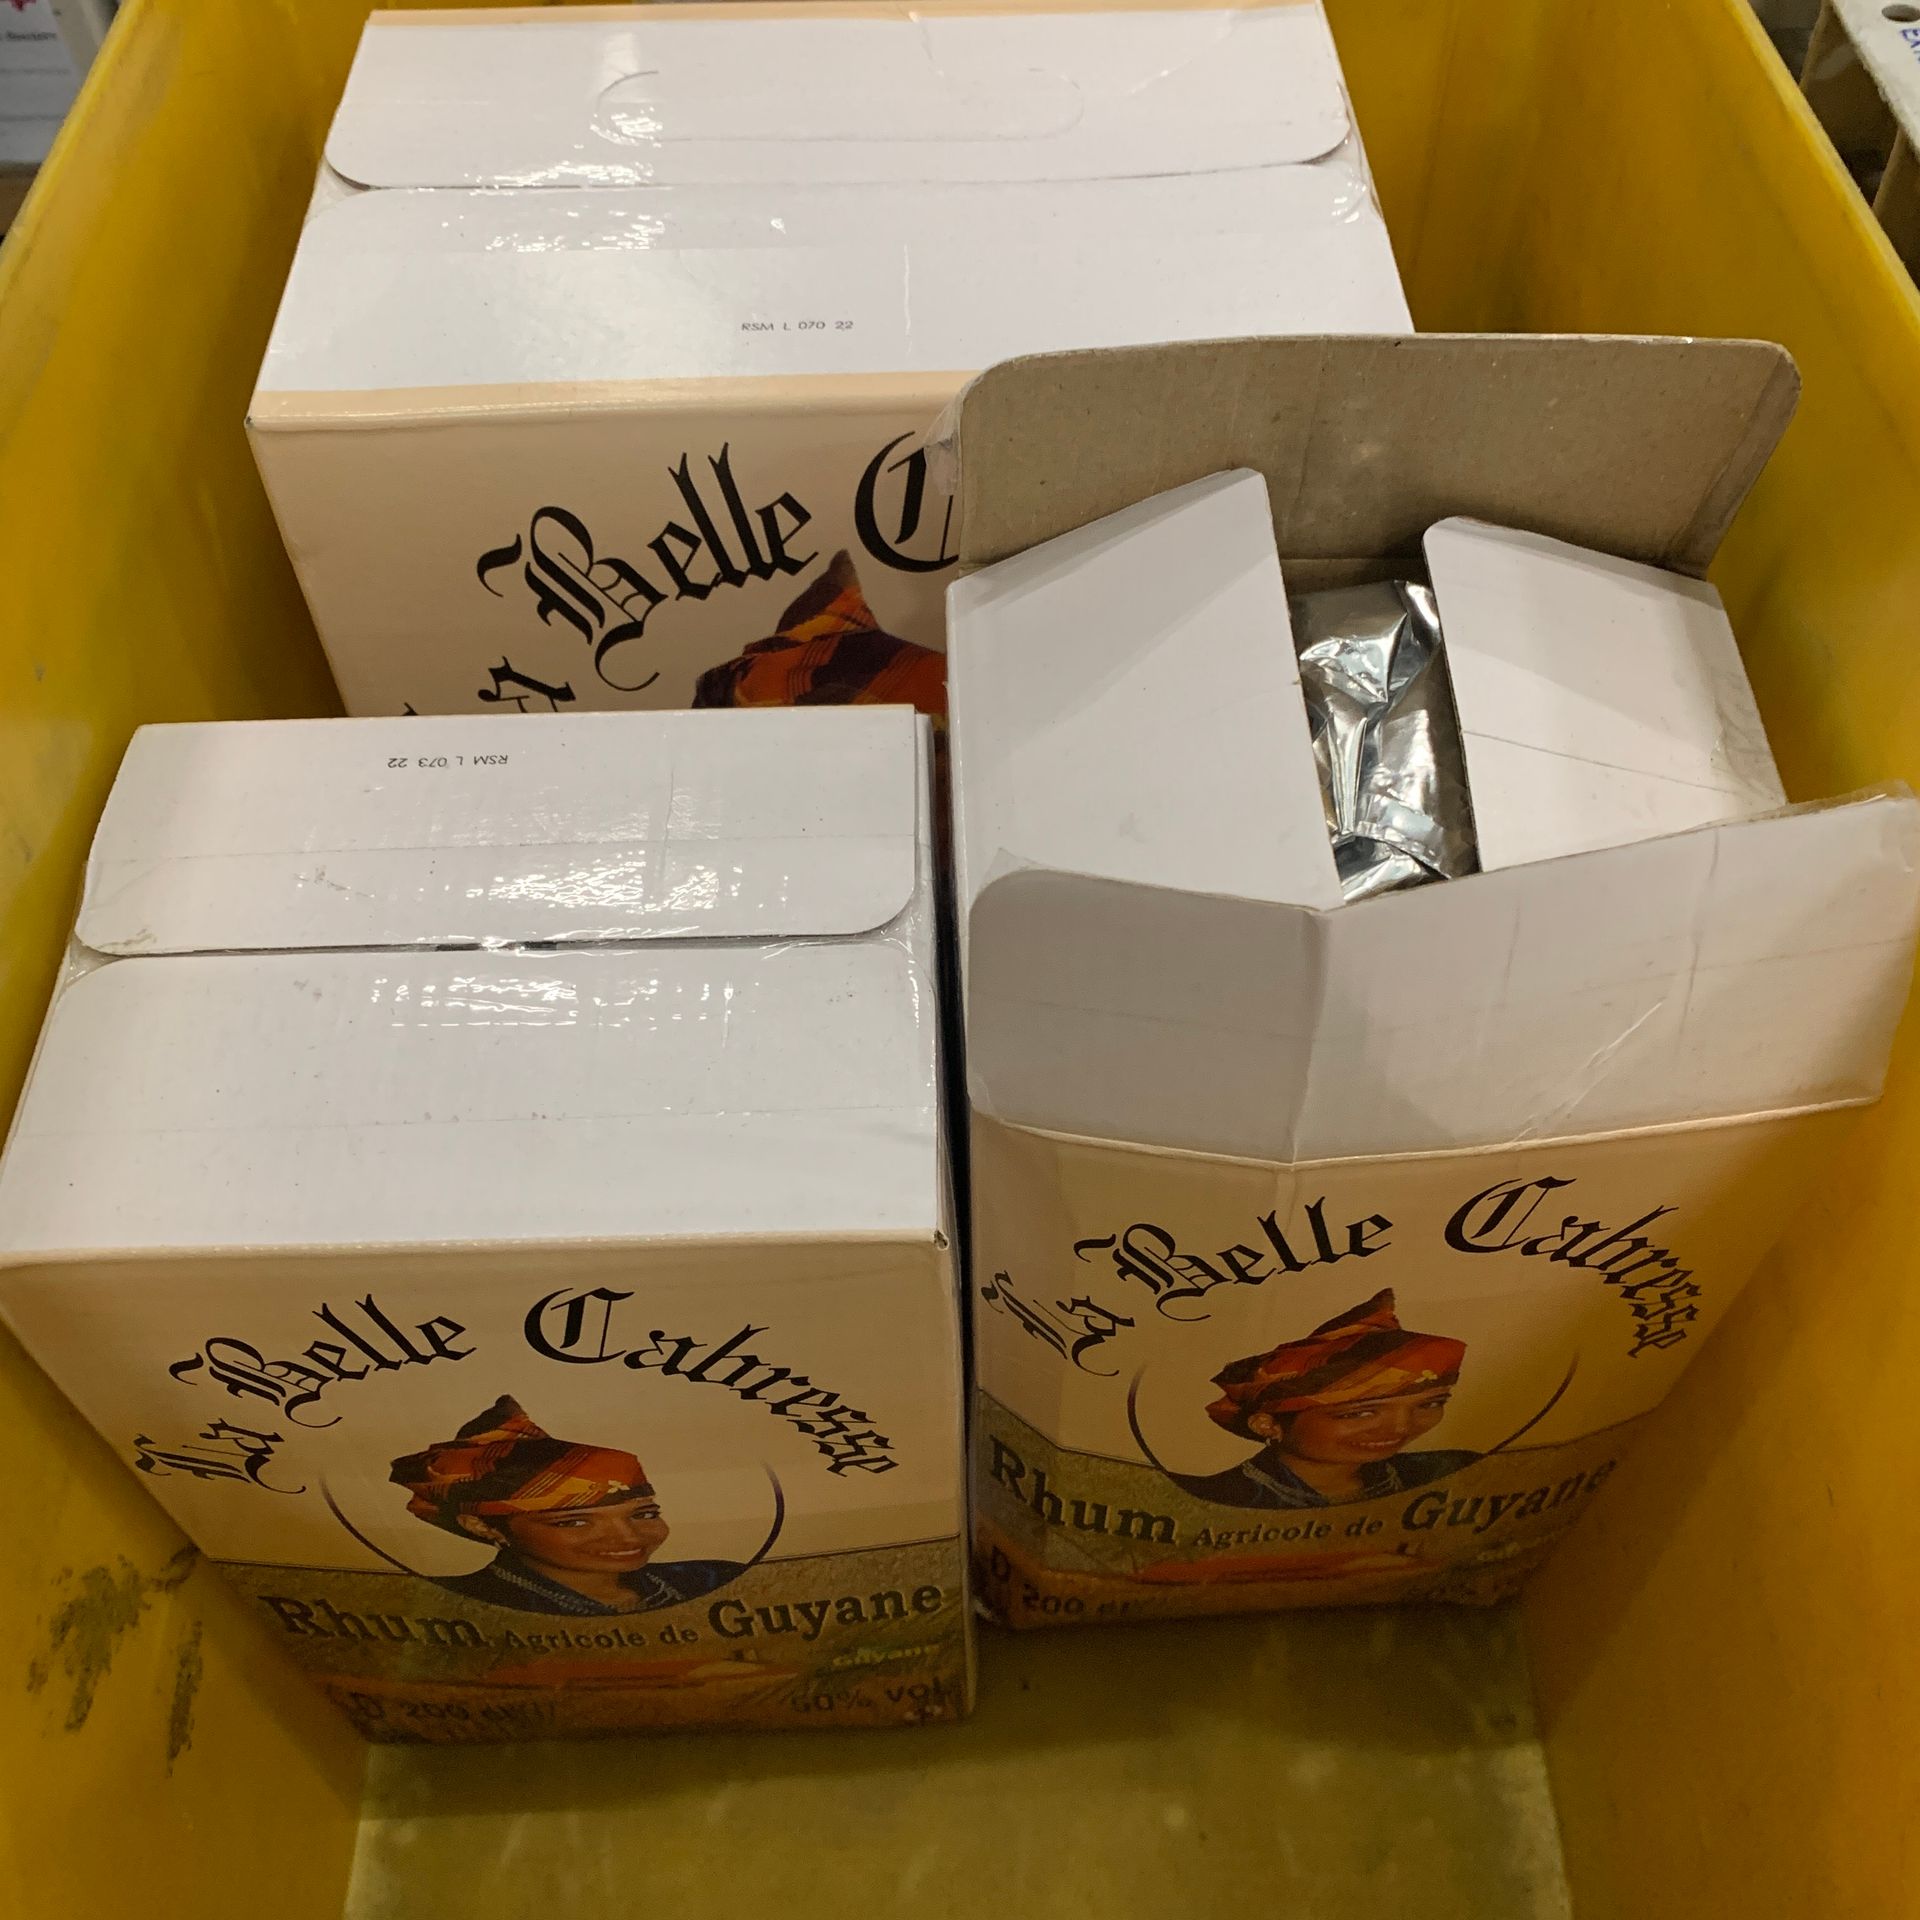 Null Batch of 3 Cubics of rum LA BELLE CABRESSE Excise duty to pay : 63 euros